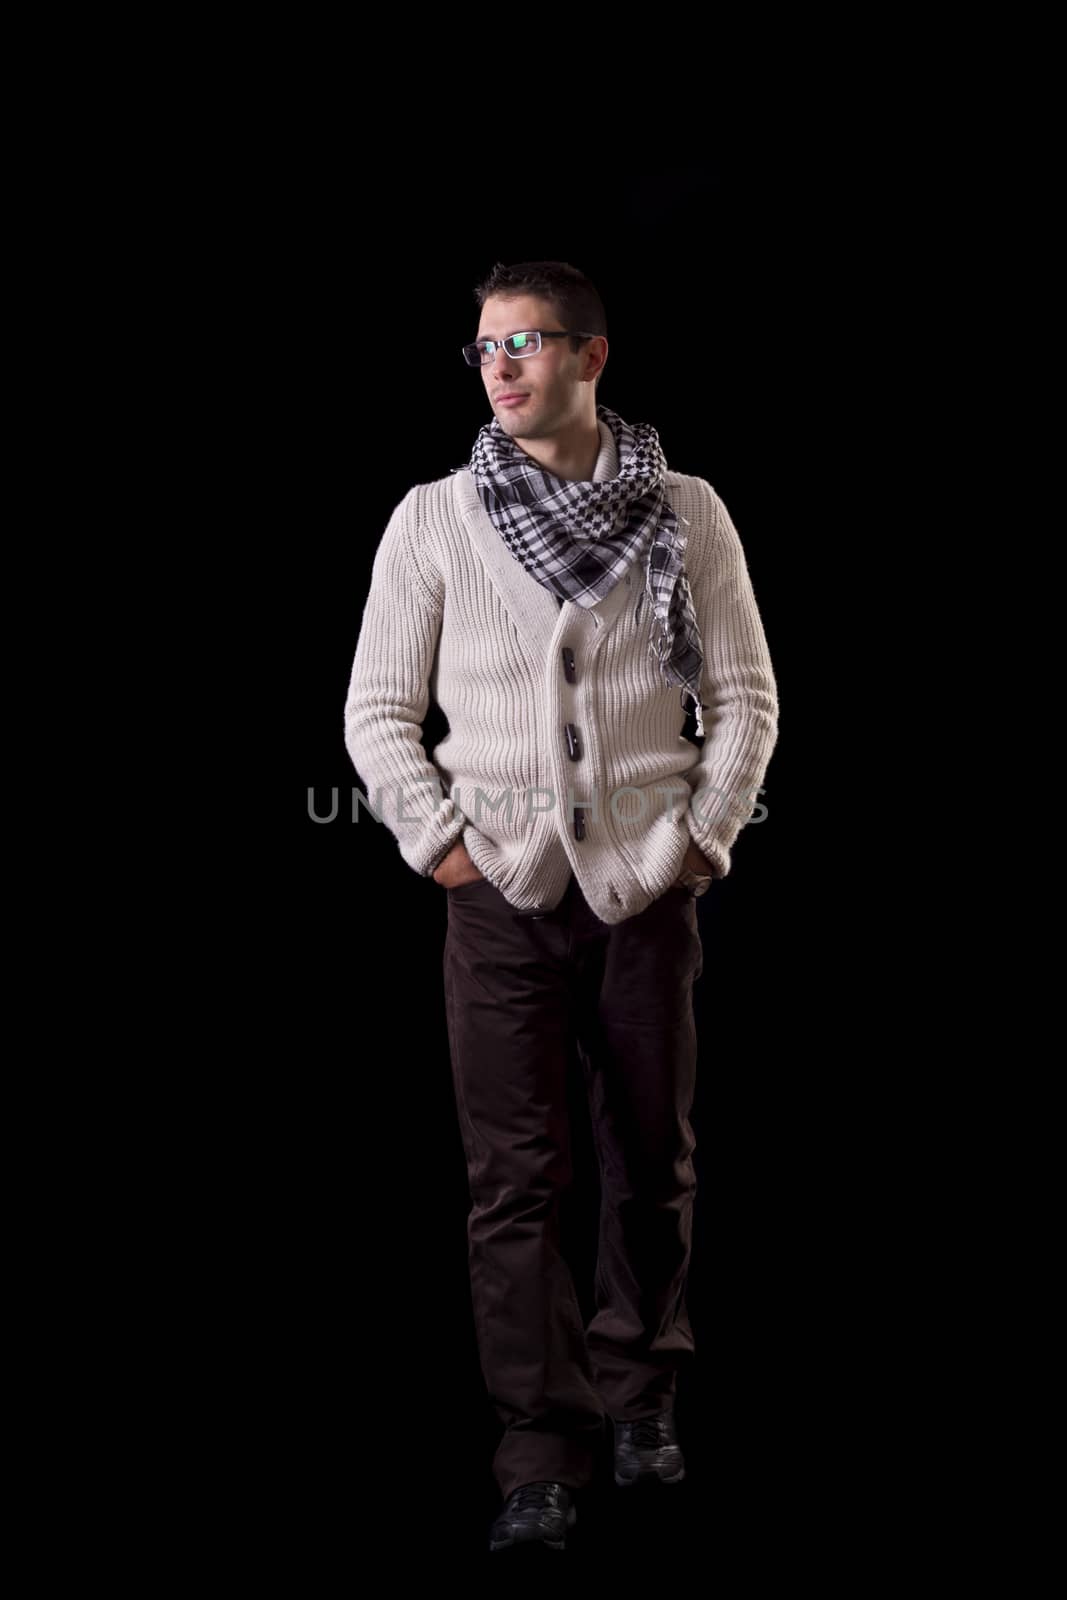 View of a young urban styled fashioned man walking isolated on a black background.